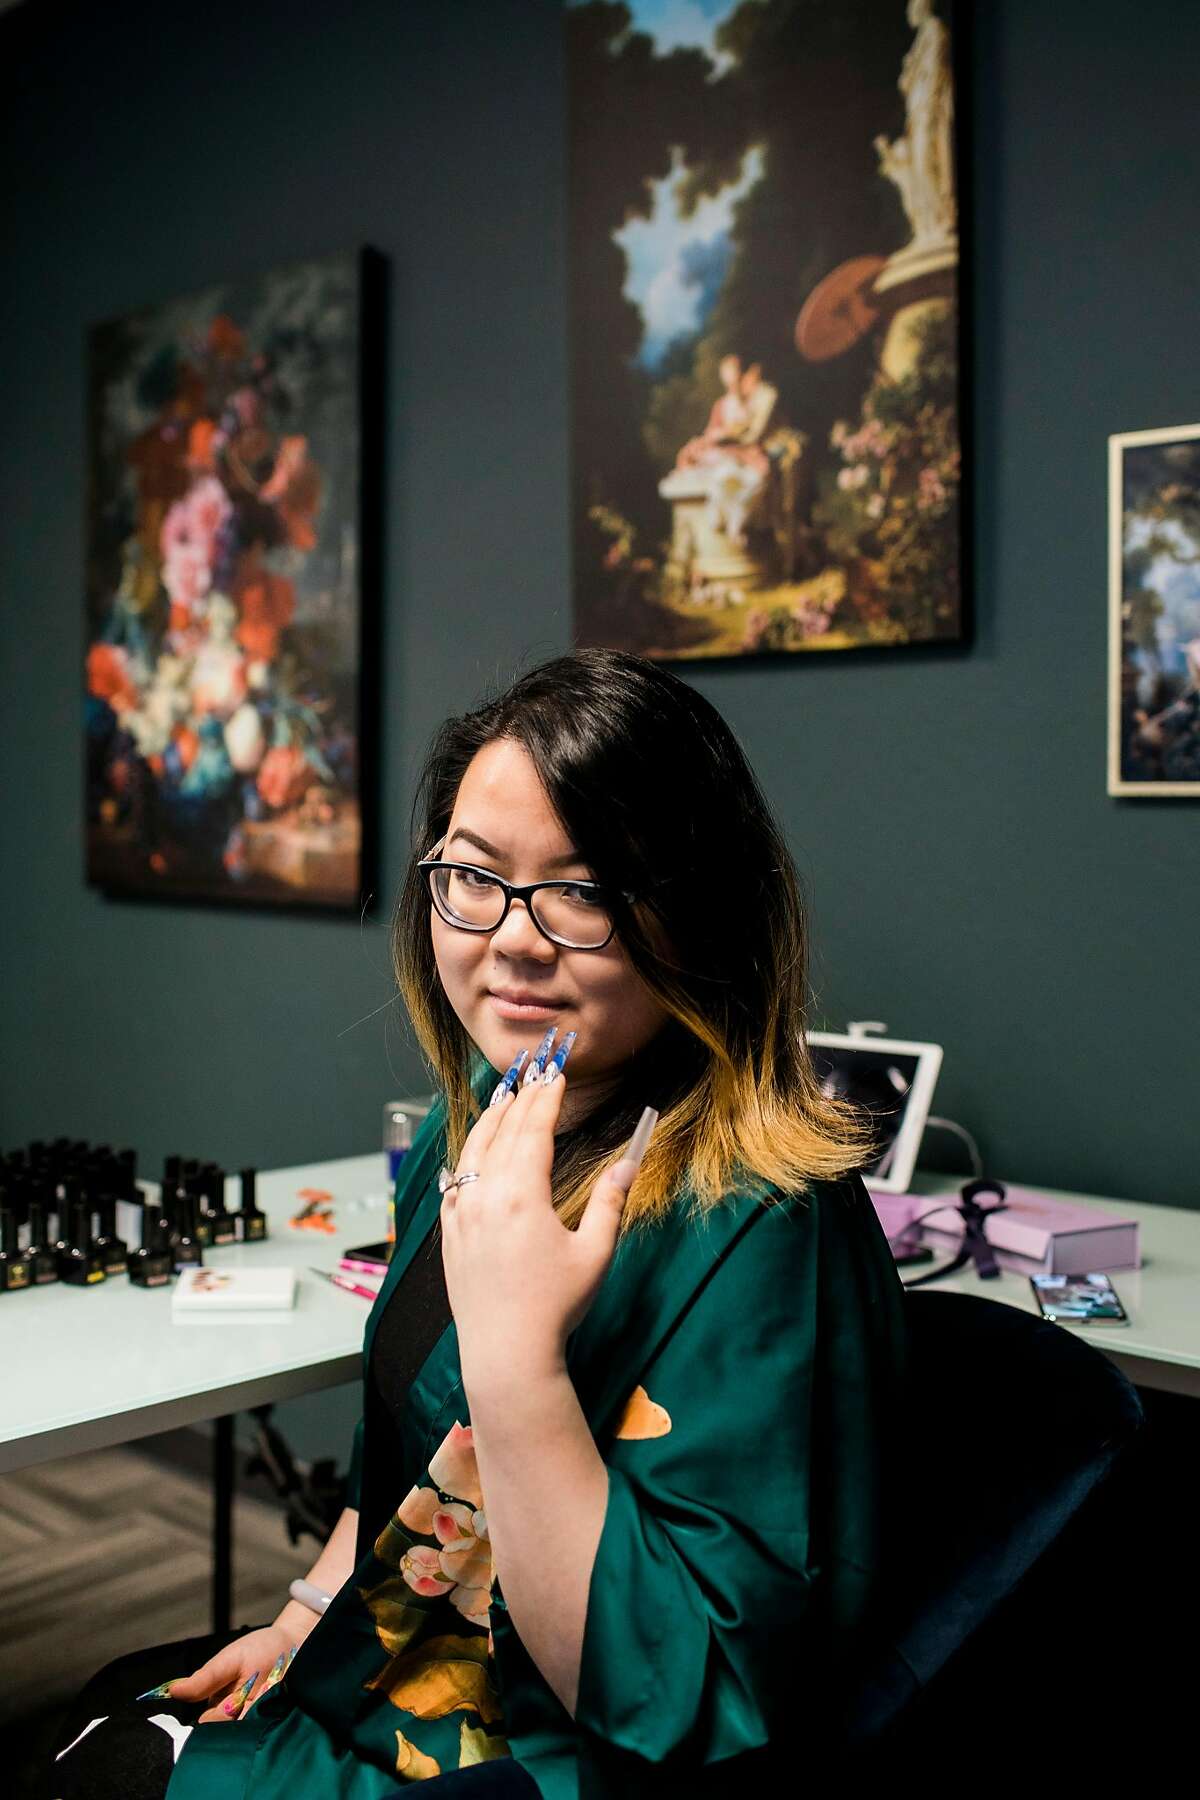 Pamper founder Vivian Xue Rahey, 29, at her office in Fremont, Calif. Pamper was a brick and mortar nail salon, but the pandemic forced it online, where it now sells hand-painted, press-on nail sets.